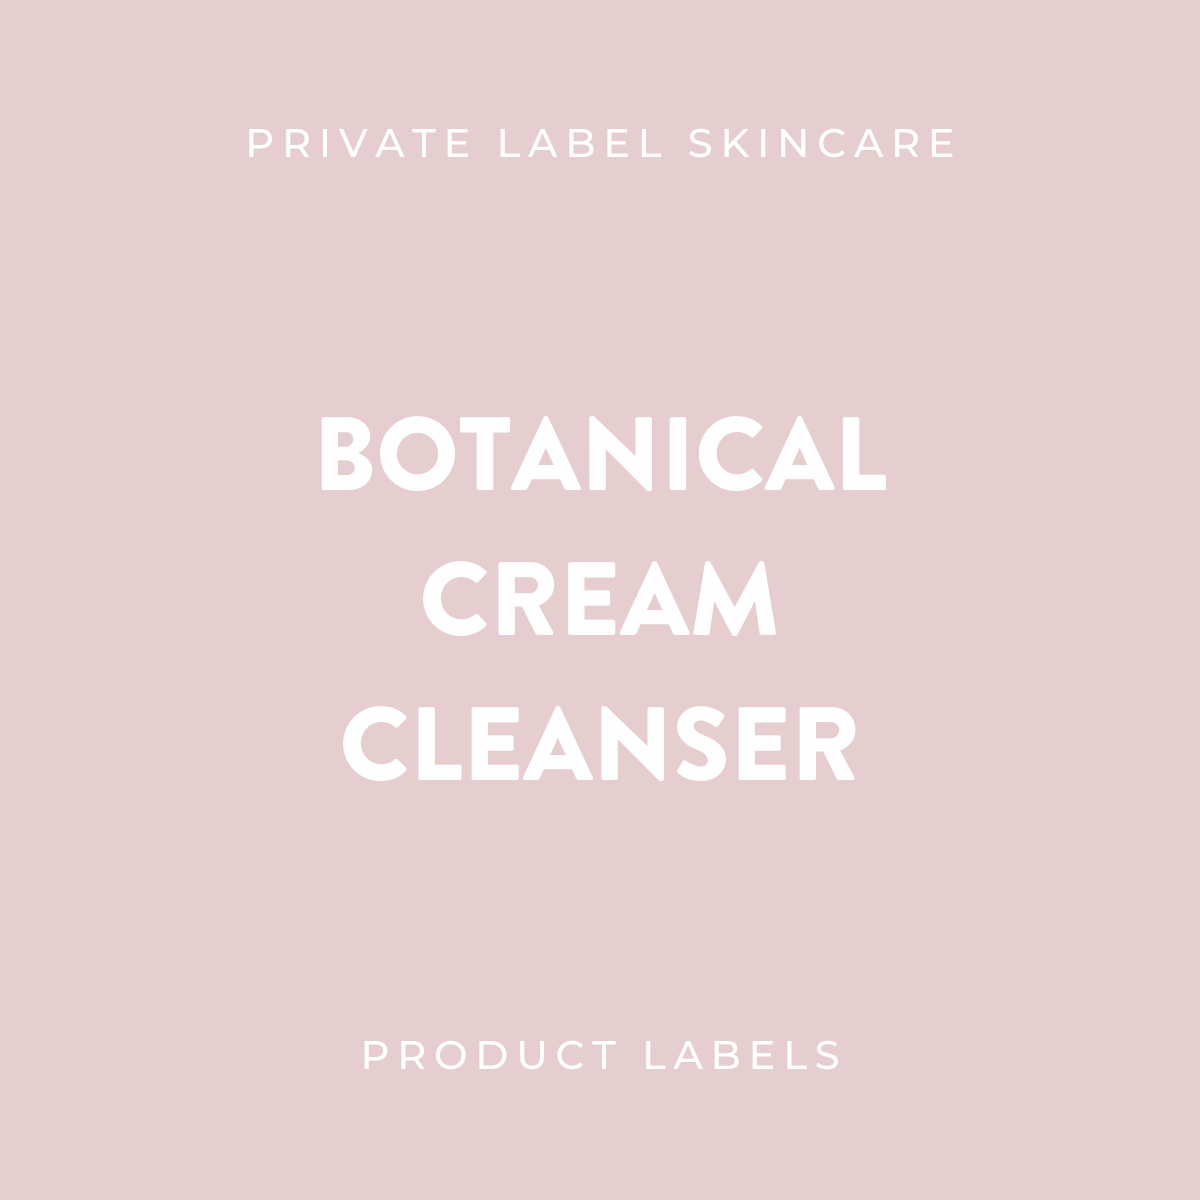 Botanical Cream Cleanser Product Labels (x 20 labels)